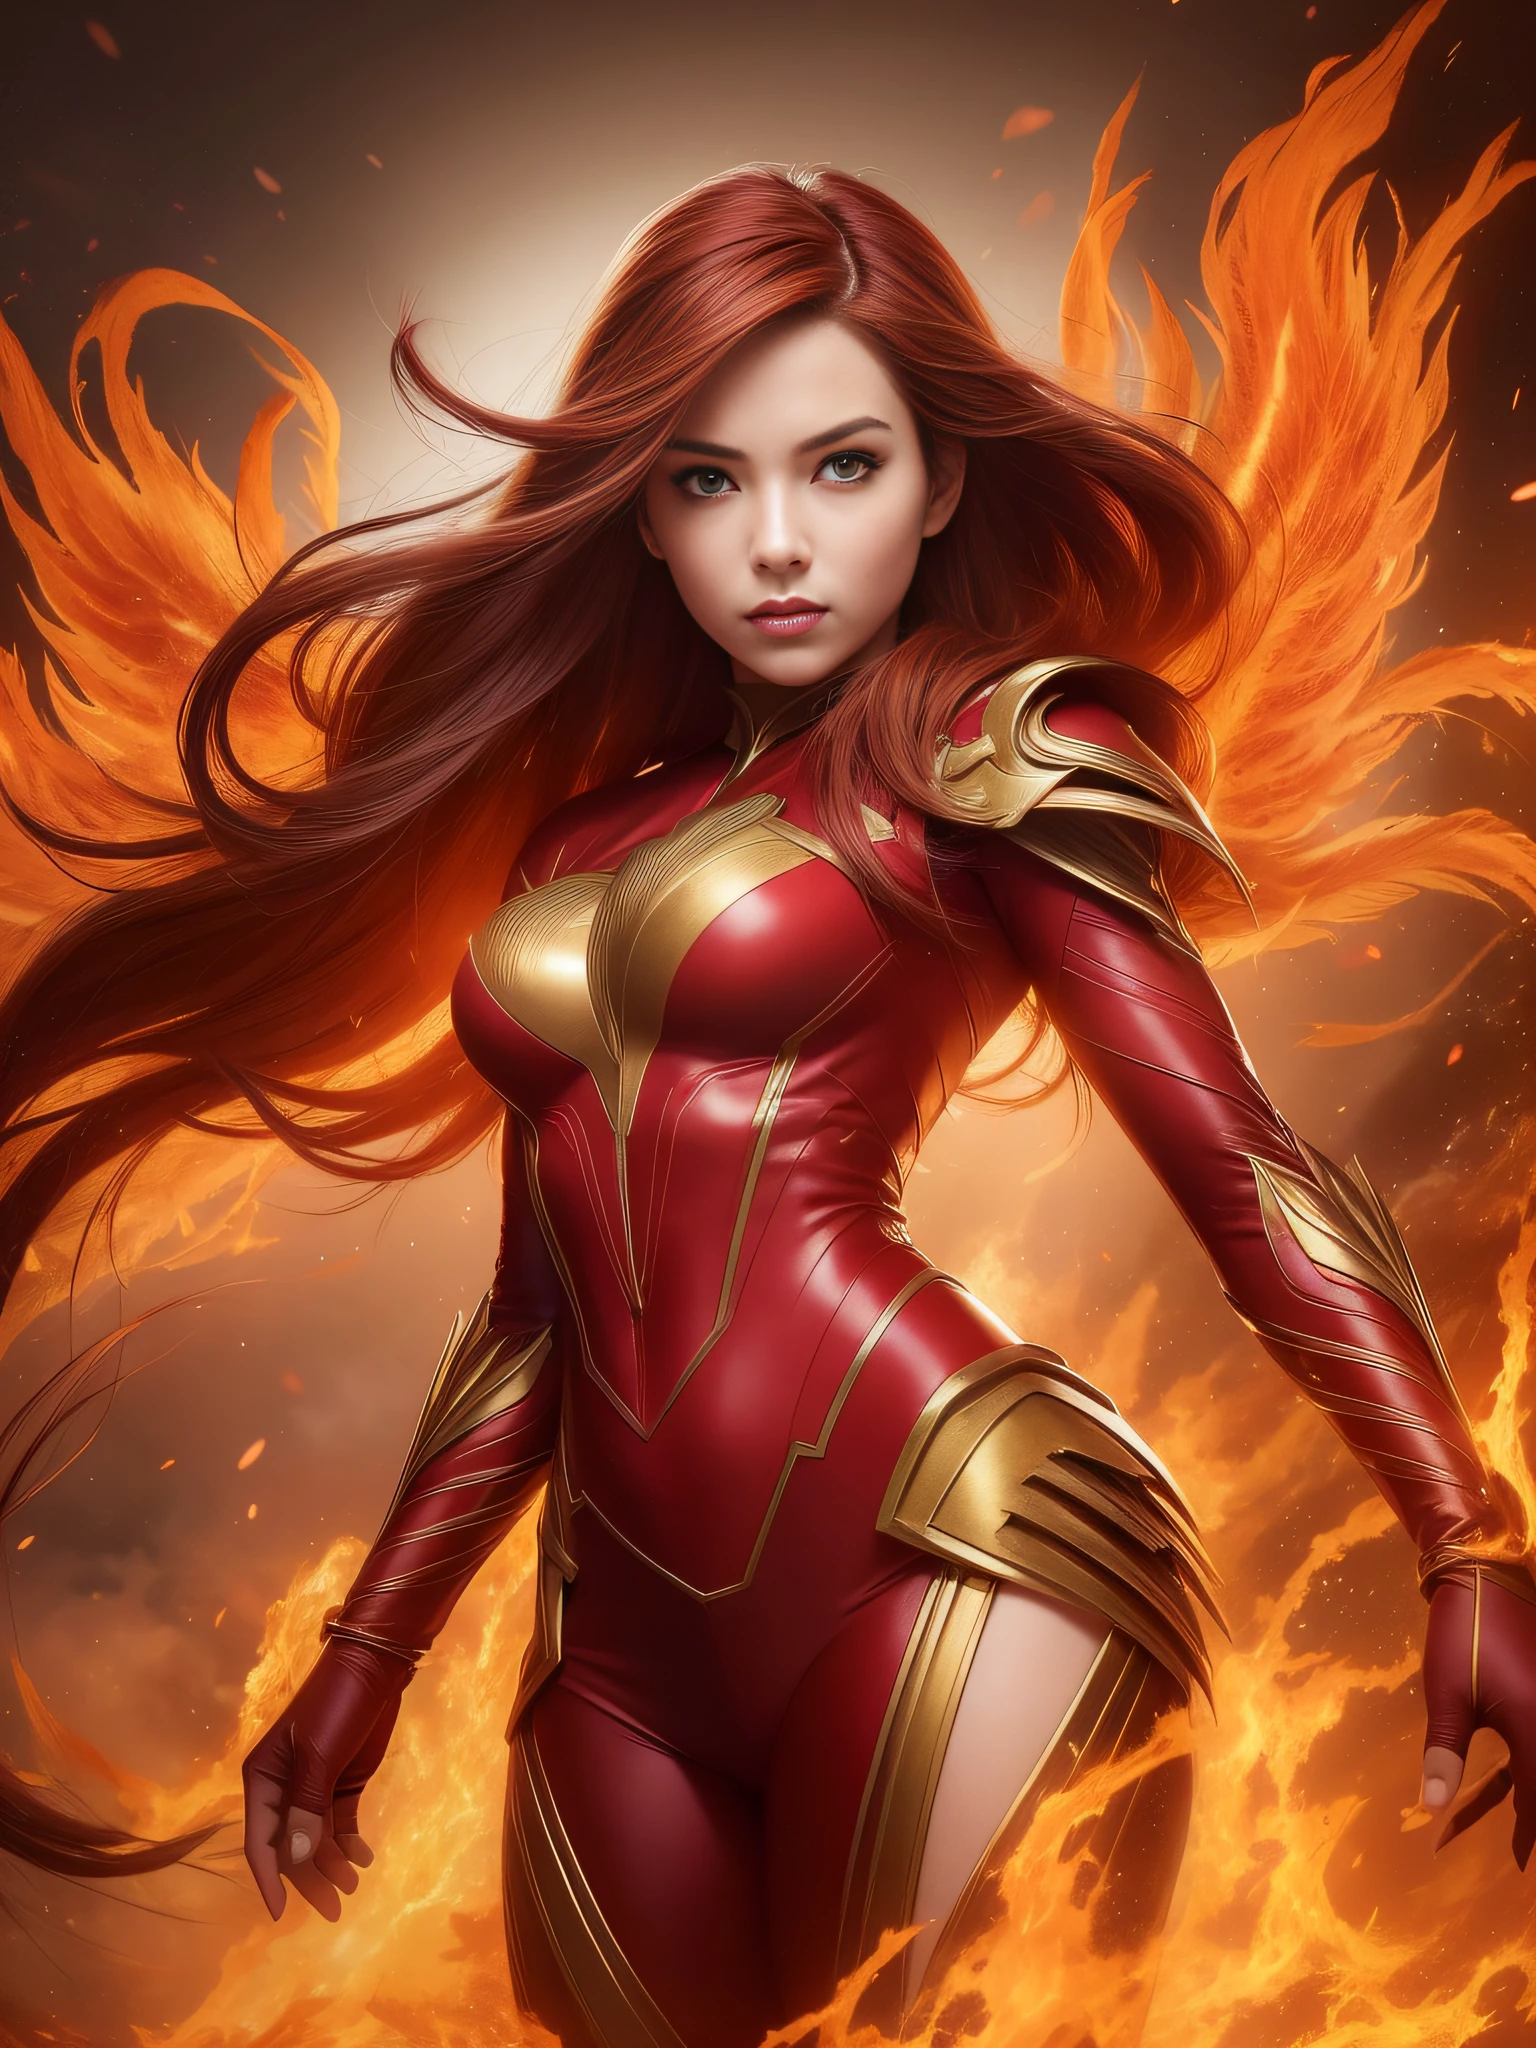 Describe Jean Grey in her Phoenix form, with flaming fire feathers protruding from her back and enveloping her body. Her eyes glow with a golden light as she floats in the air, surrounded by an aura of flames. His hands are stretched forward, sparks of cosmic energy coming out of his fingertips. She wears a red and gold suit with patterns of fire feathers, and her expression is determined and powerful. In the background, there is an intense glow of flames and a silhouette of trees burning amid the flames.